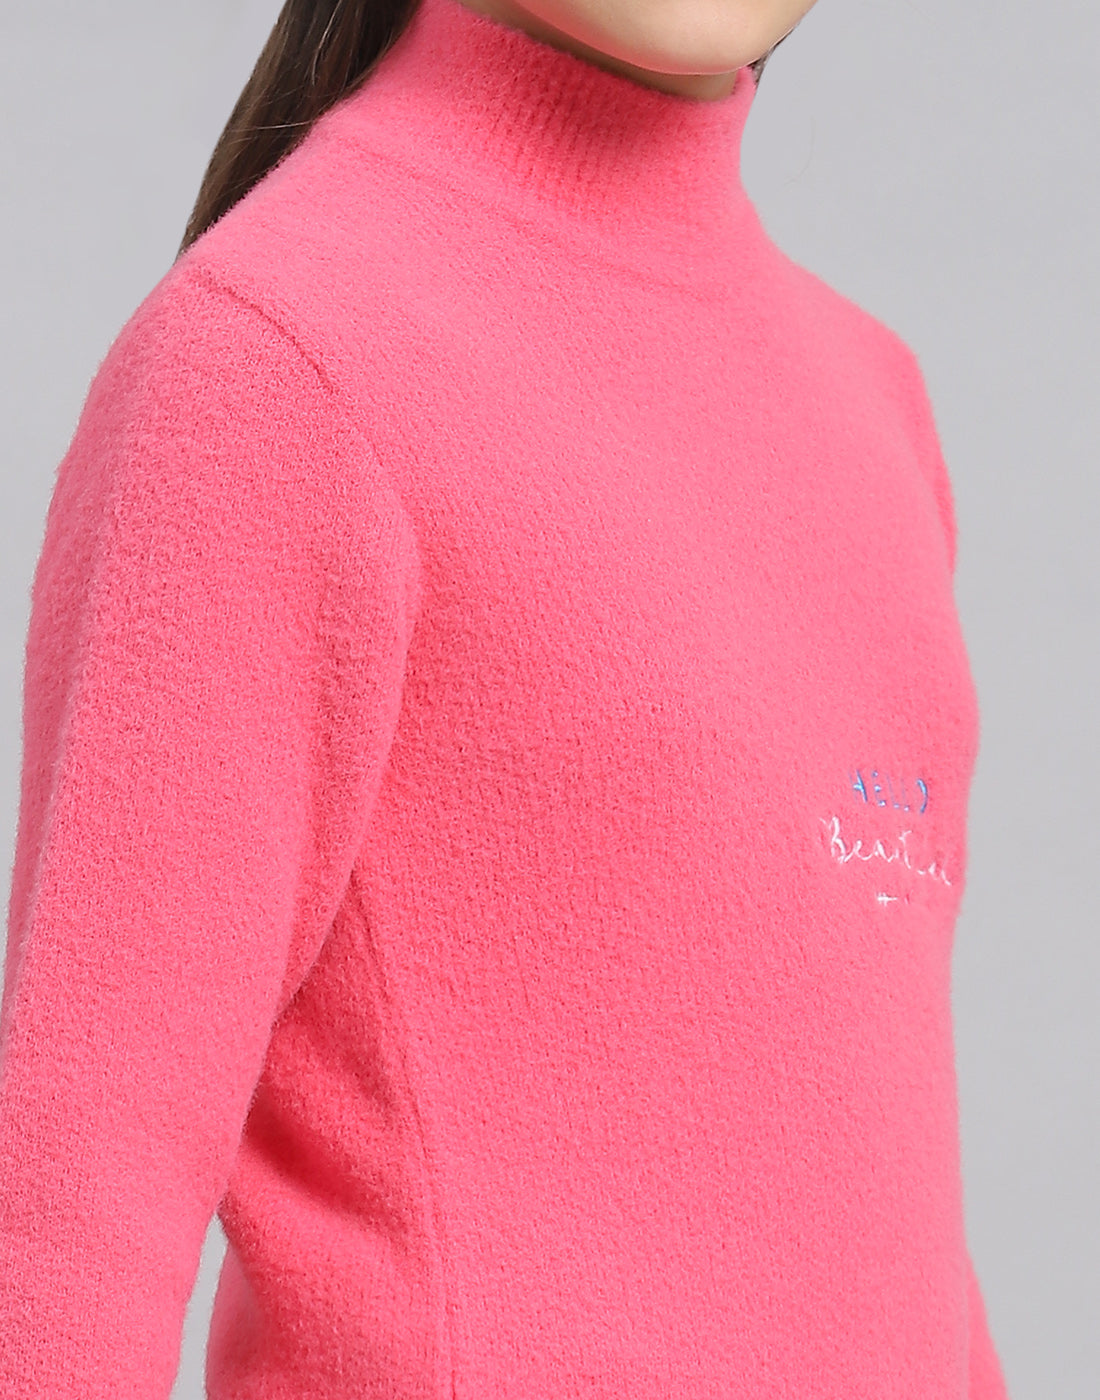 Girls Pink Solid T Neck Full Sleeve Sweater